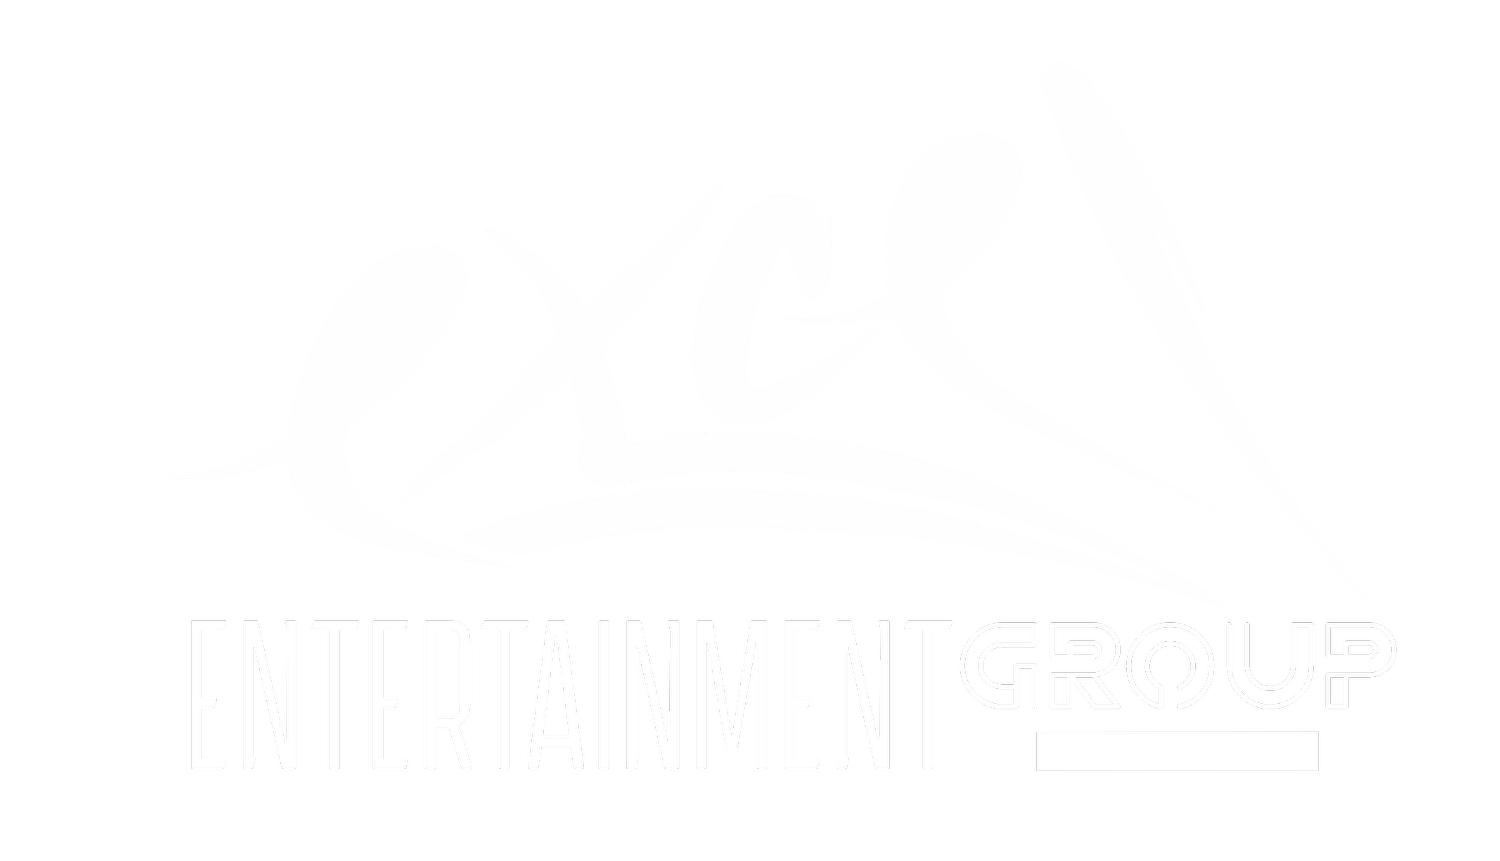 Excel Entertainment group